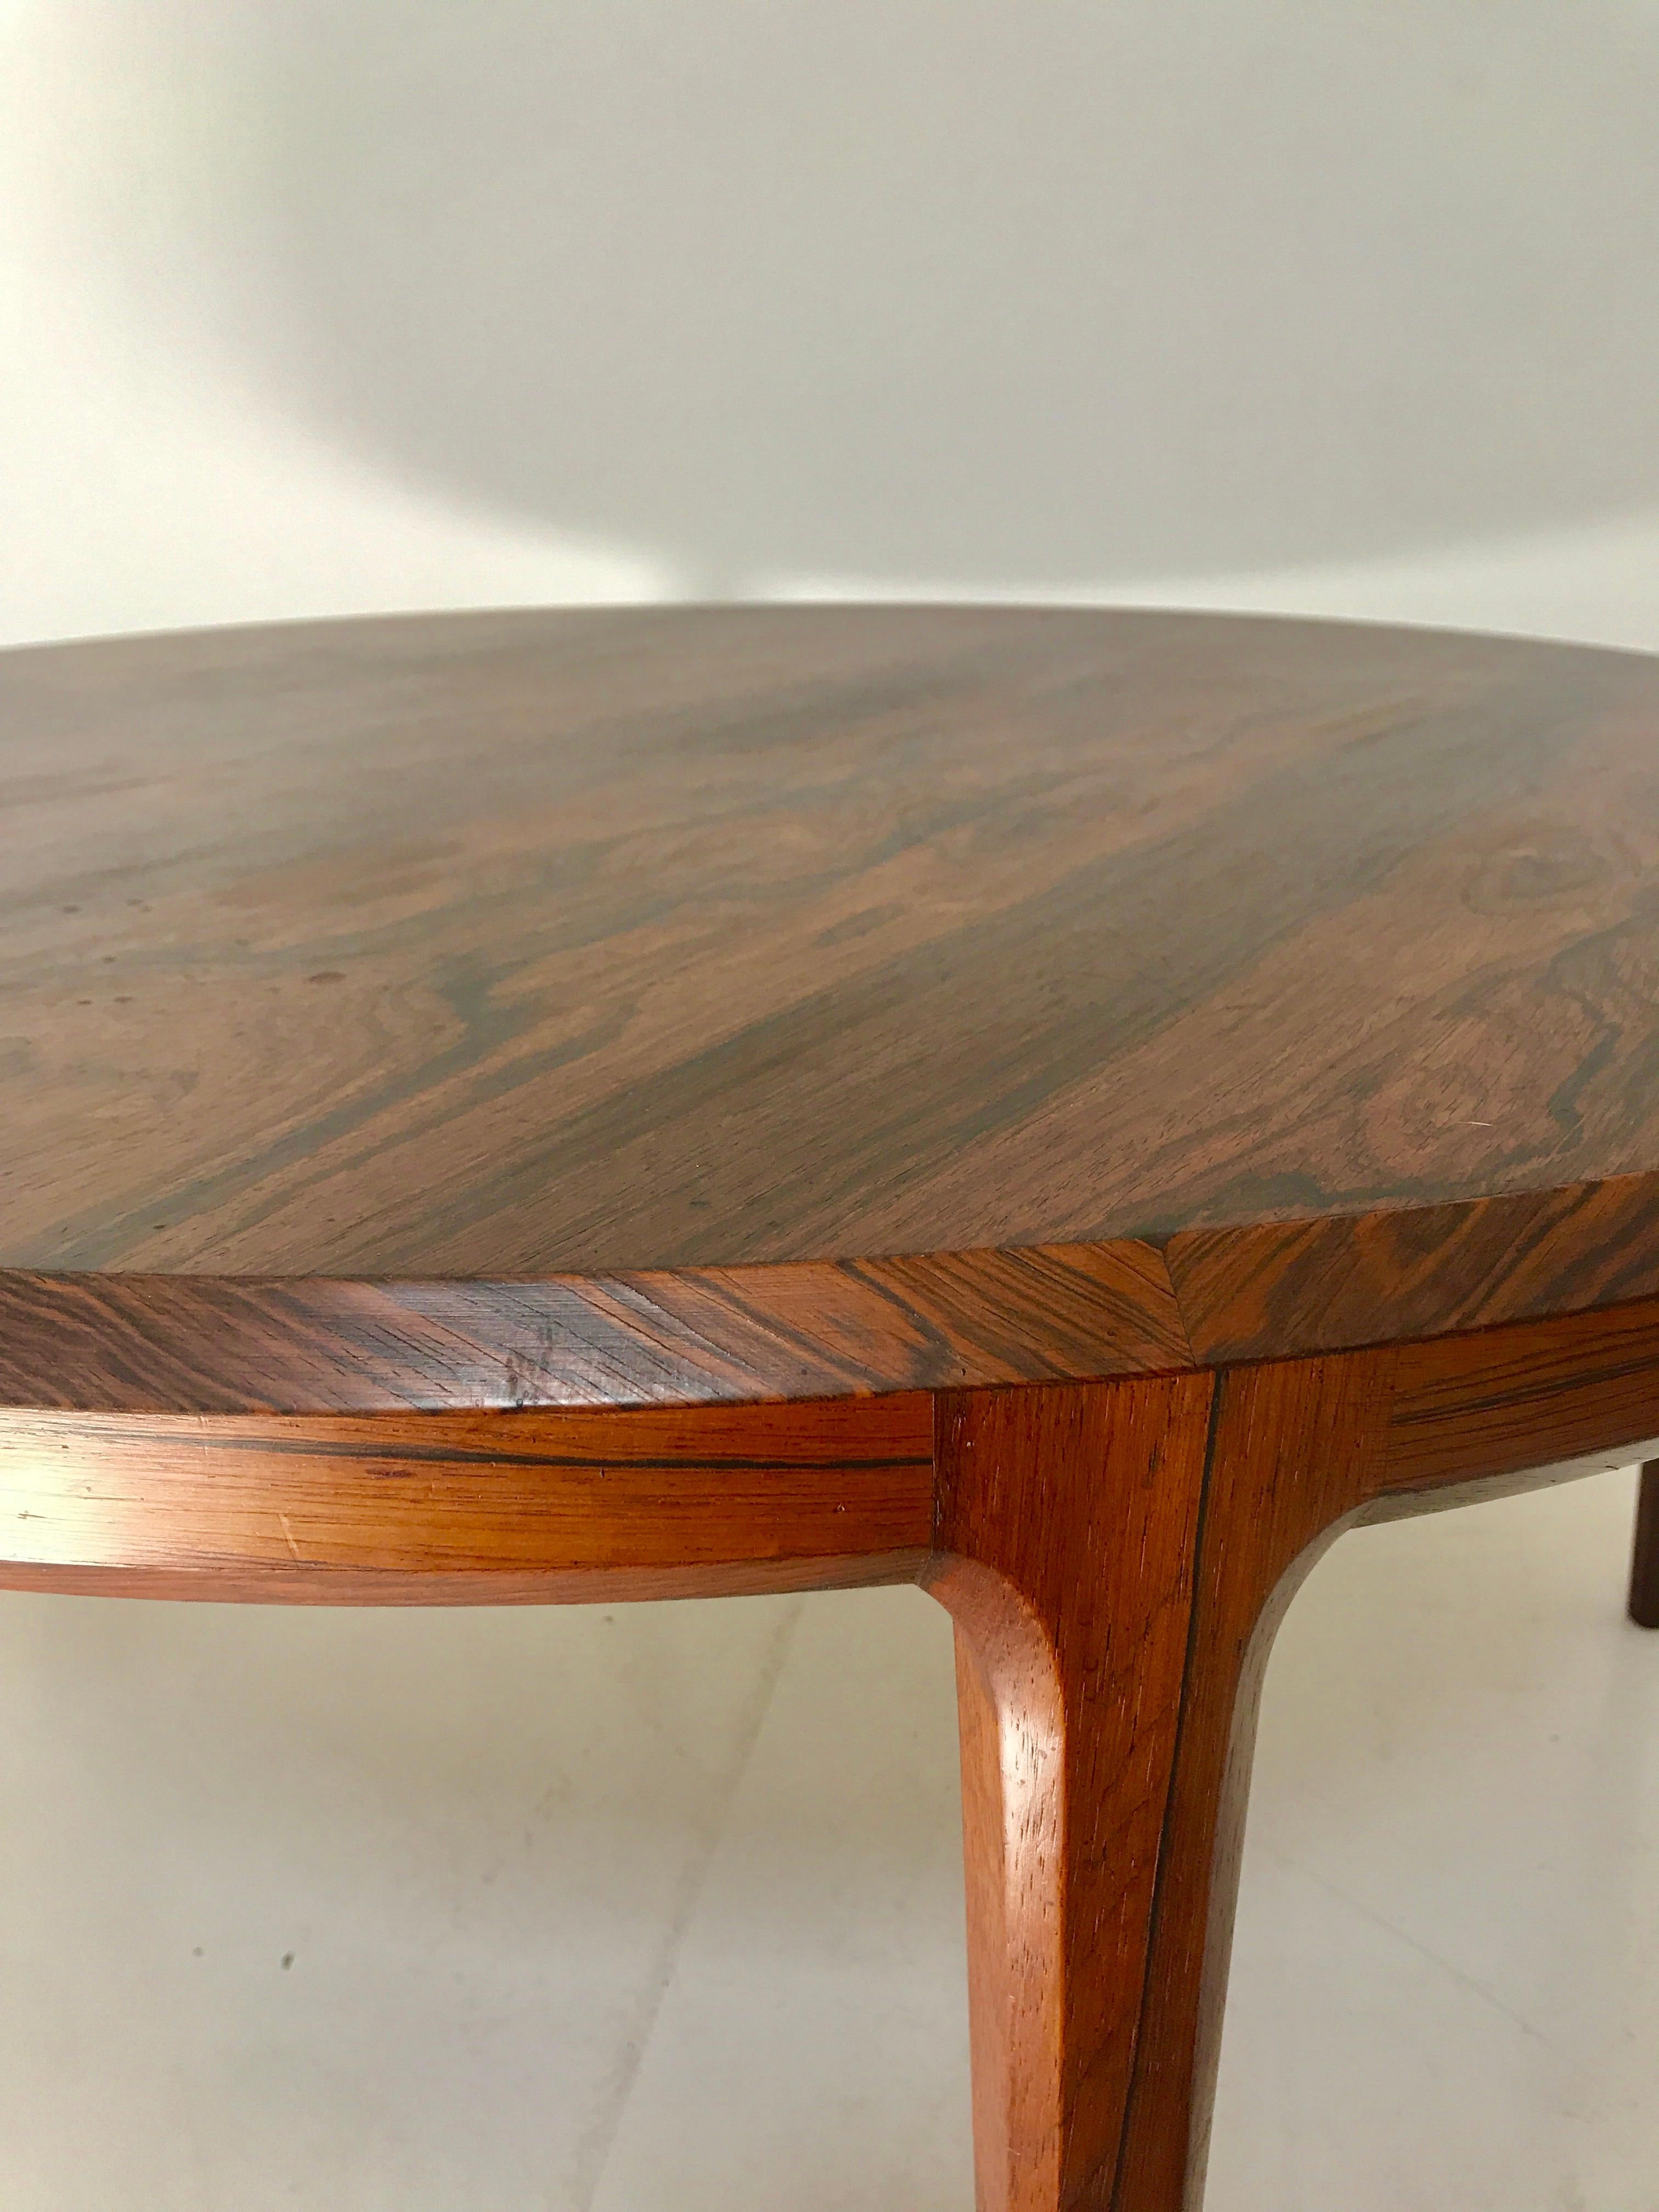 Beautiful rosewood coffee table was design by Johannes Anderson for C.F.C Silkeborg and manufactured in Denmark during the 1960s. It is a model number 283. This series of tables was one of Andersen's most popular. The unique constraction technique